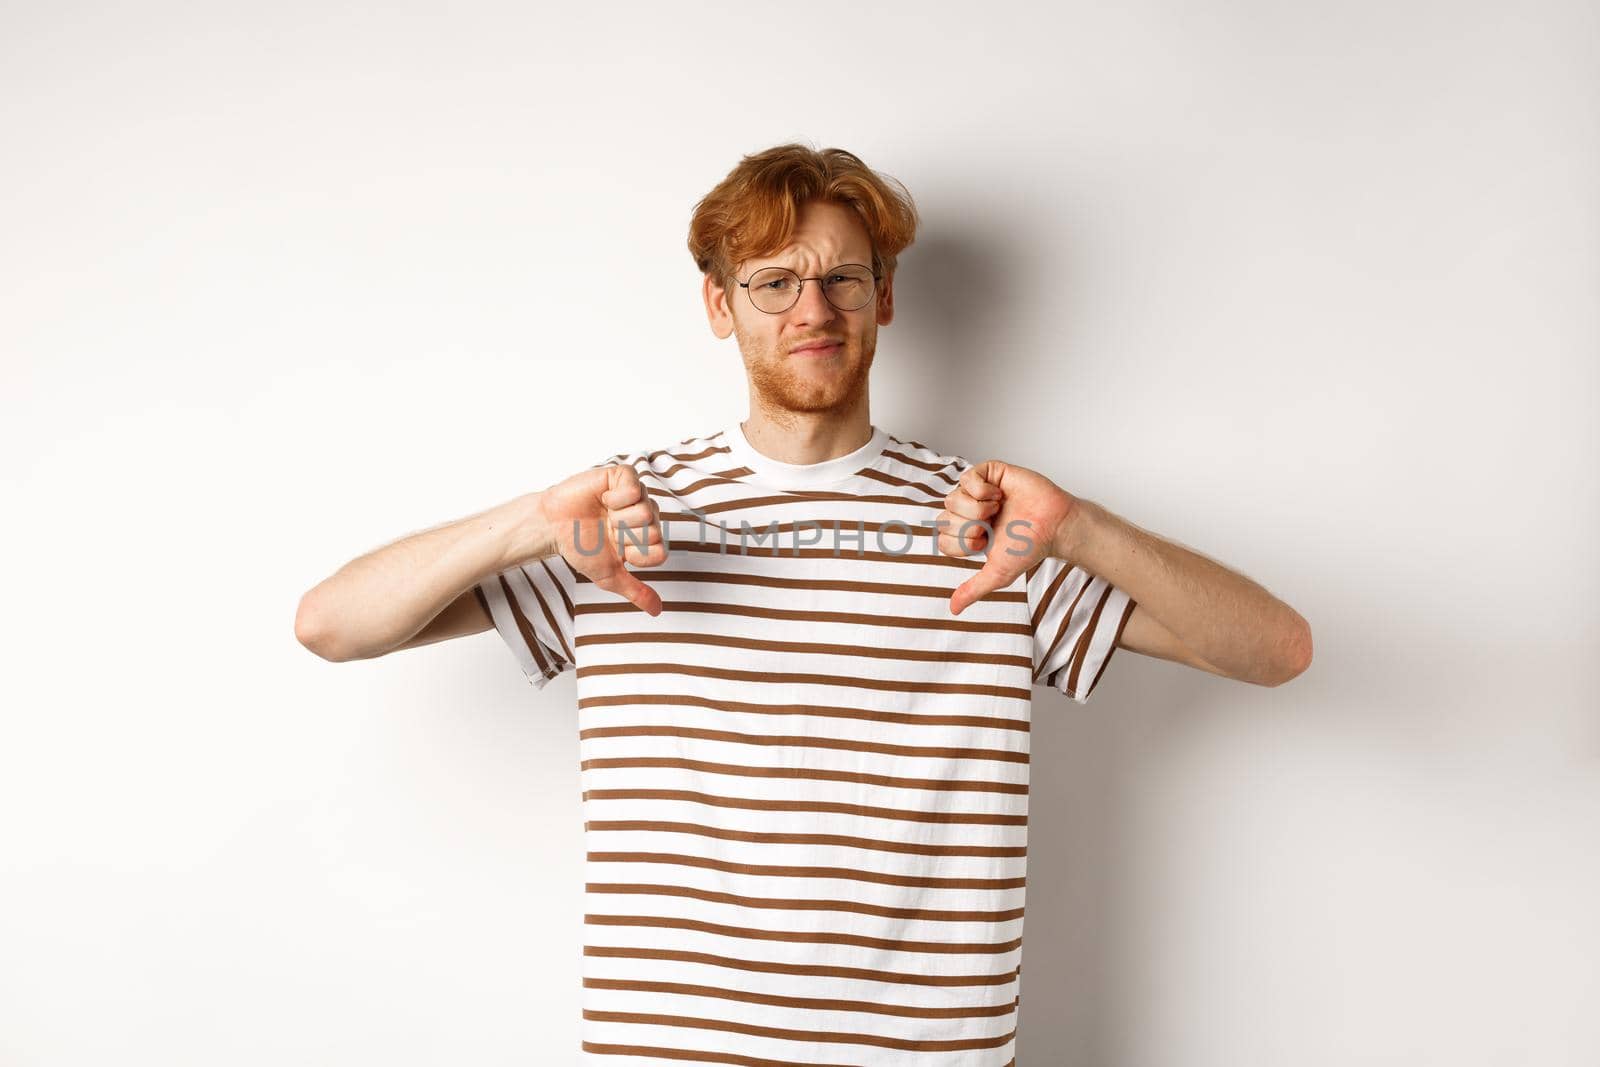 Disappointed young man with red hair and glasses disagree, showing thumbs-down and frowning displeased, standing over white background.